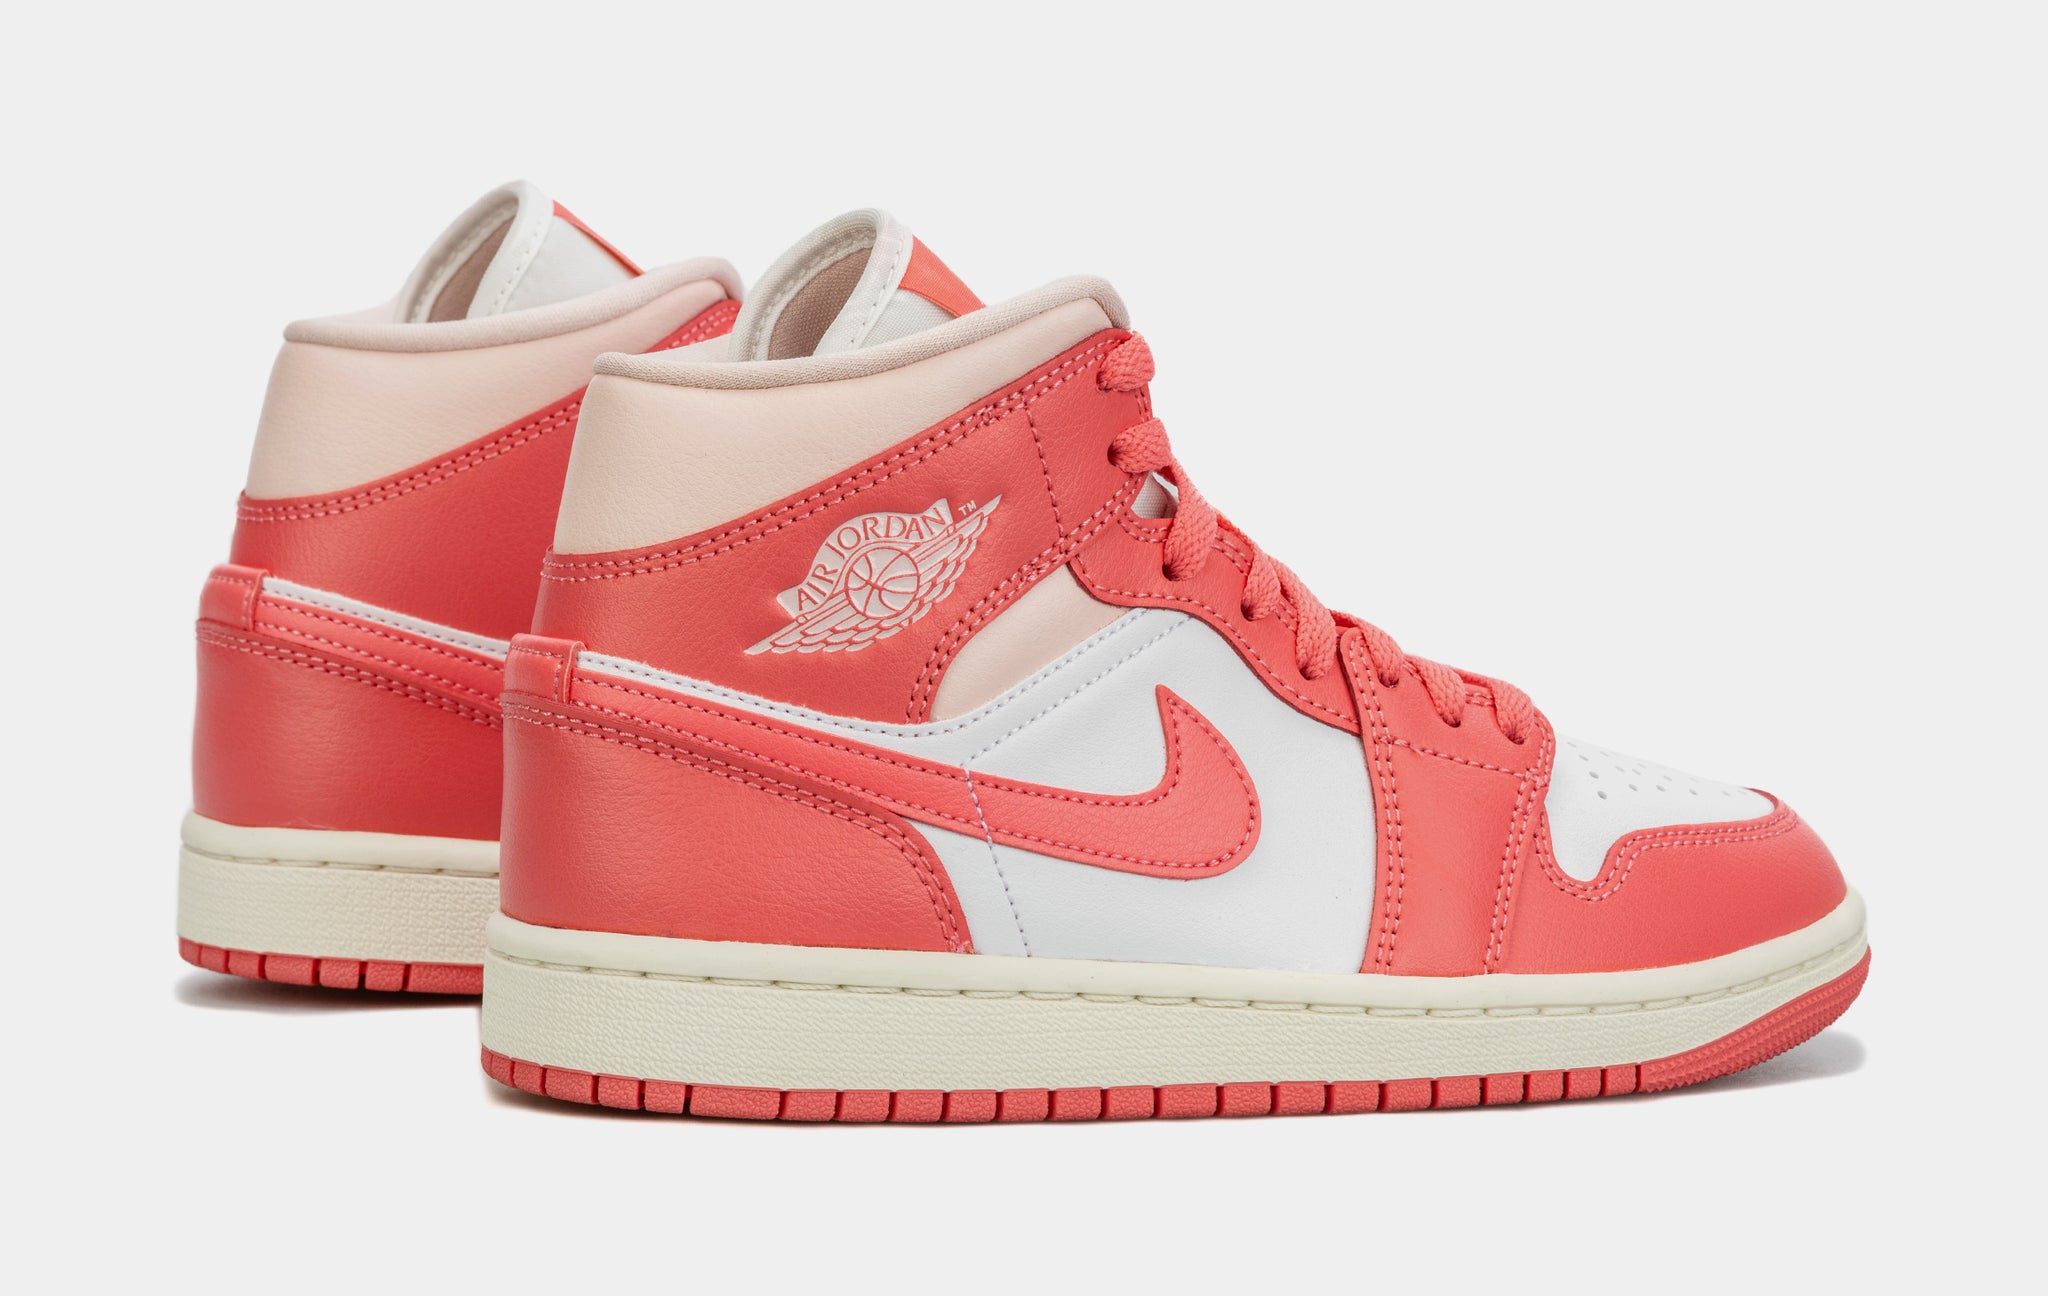 Air Jordan 1 Retro Mid Strawberries and Cream Womens Lifestyle Shoes  (Pink/Beige)